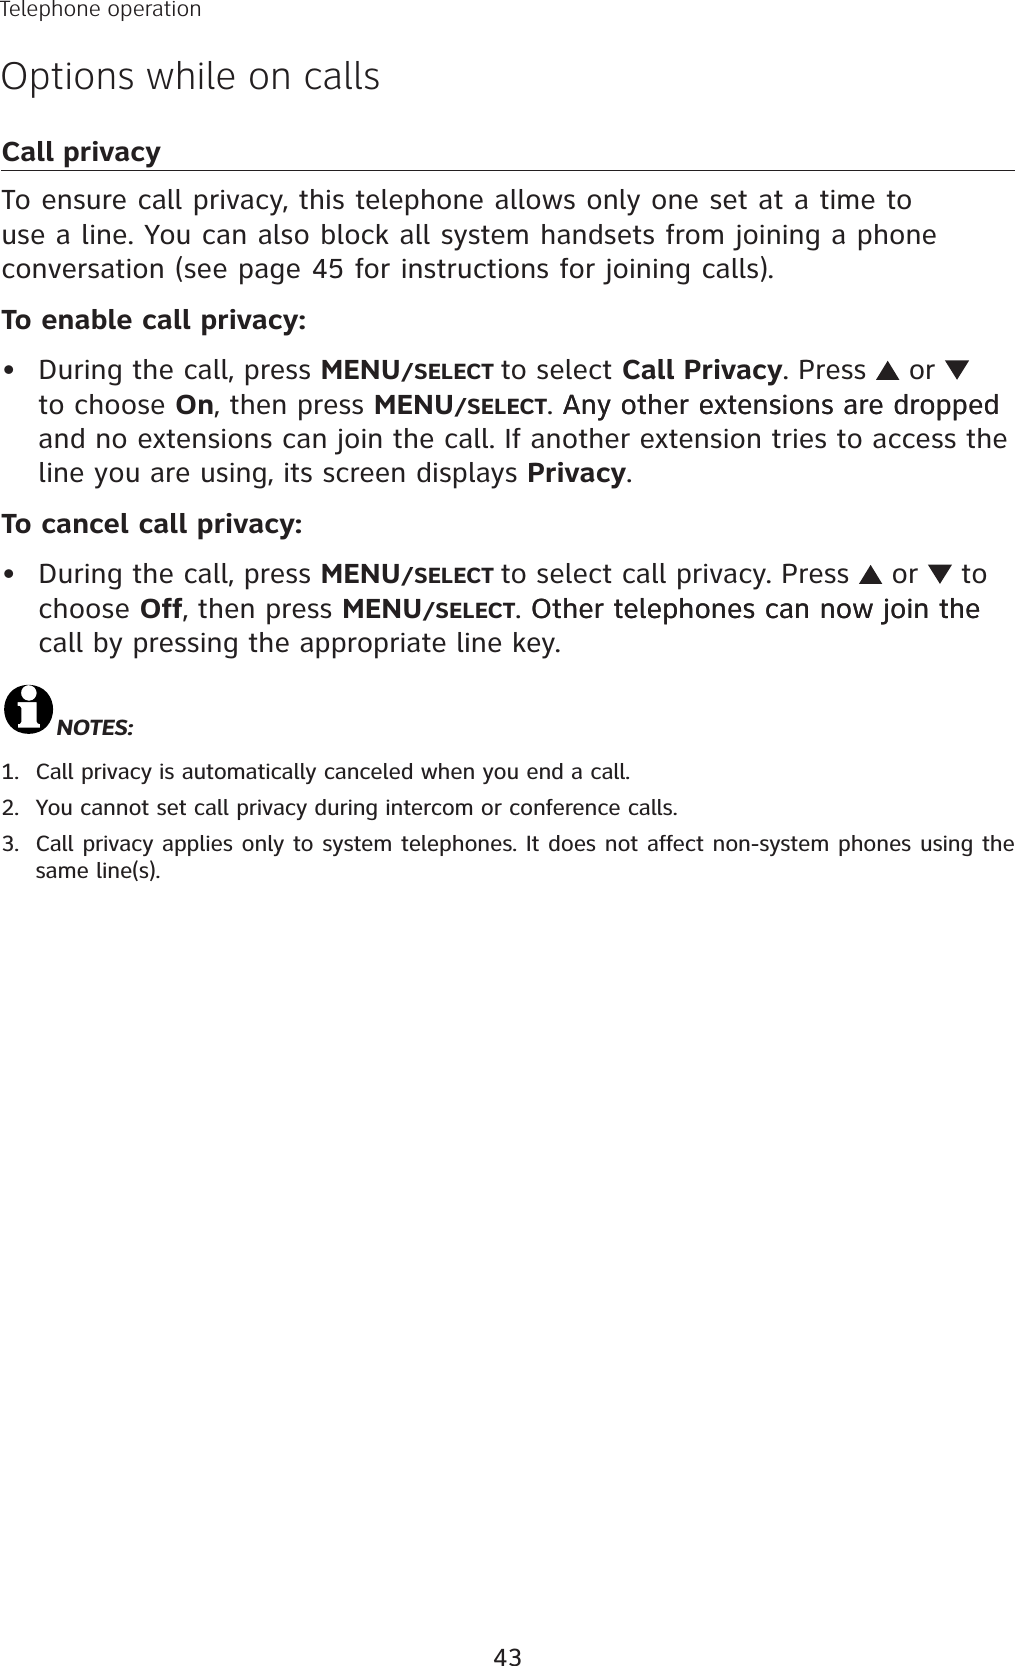 43Telephone operationOptions while on callsCall privacyTo ensure call privacy, this telephone allows only one set at a time to use a line. You can also block all system handsets from joining a phone conversation (see page 45 for instructions for joining calls).To enable call privacy:During the call, press MENU/SELECT to select Call Privacy. Press   or to choose On, then press MENU/SELECT. Any other extensions are dropped Any other extensions are dropped and no extensions can join the call. If another extension tries to access the line you are using, its screen displays Privacy.To cancel call privacy:During the call, press MENU/SELECT to select call privacy. Press   or   to choose Off, then press MENU/SELECT. Other telephones can now join the Other telephones can now join the call by pressing the appropriate line key. NOTES:Call privacy is automatically canceled when you end a call. You cannot set call privacy during intercom or conference calls.Call privacy applies only to system telephones. It does not affect non-system phones using the same line(s).••1.2.3.